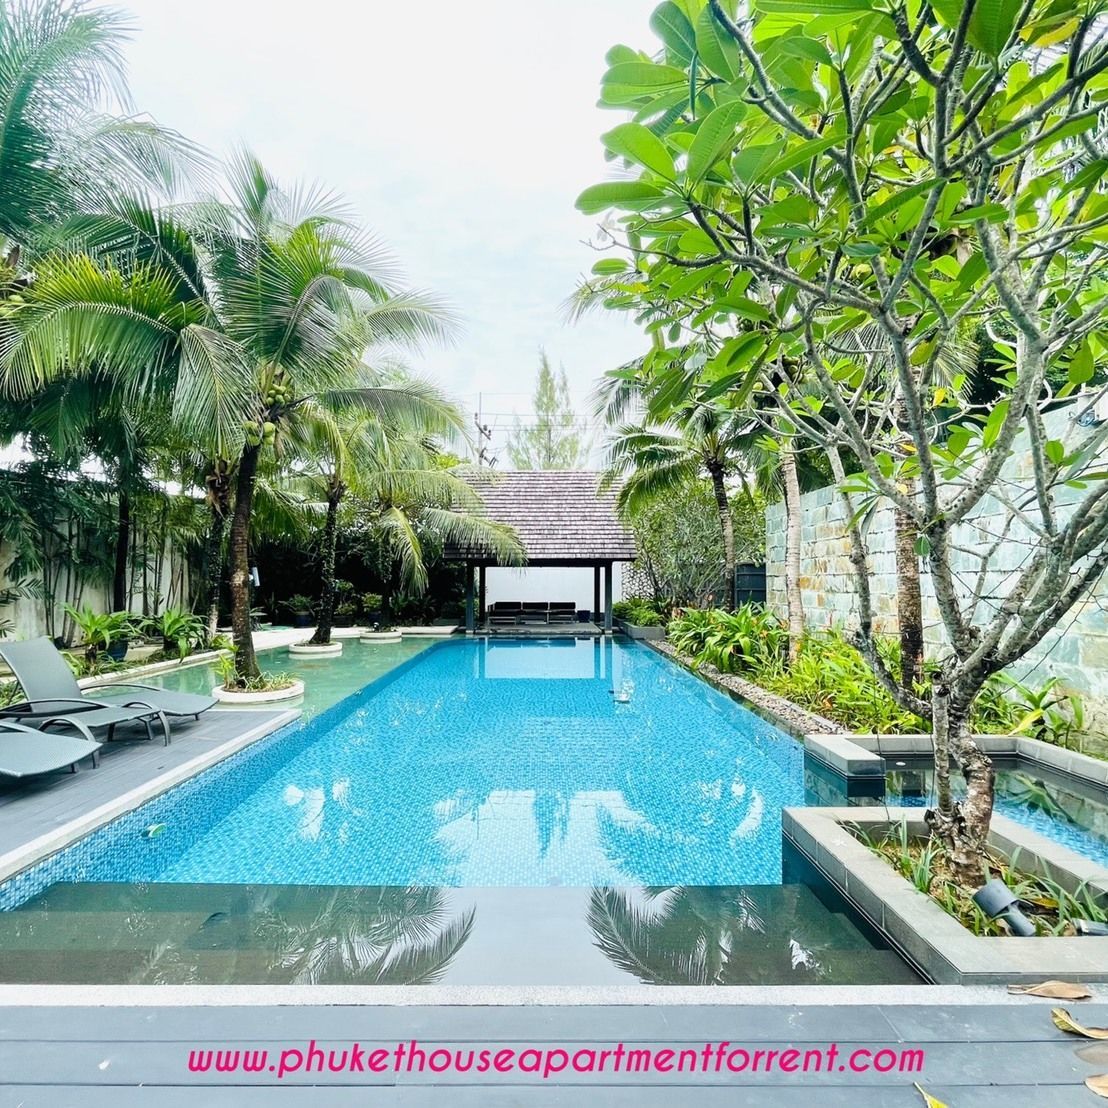 3 Bedrooms Villa with big private pool and huge area for rent. Located at Kok- Tanode, Layan Beach